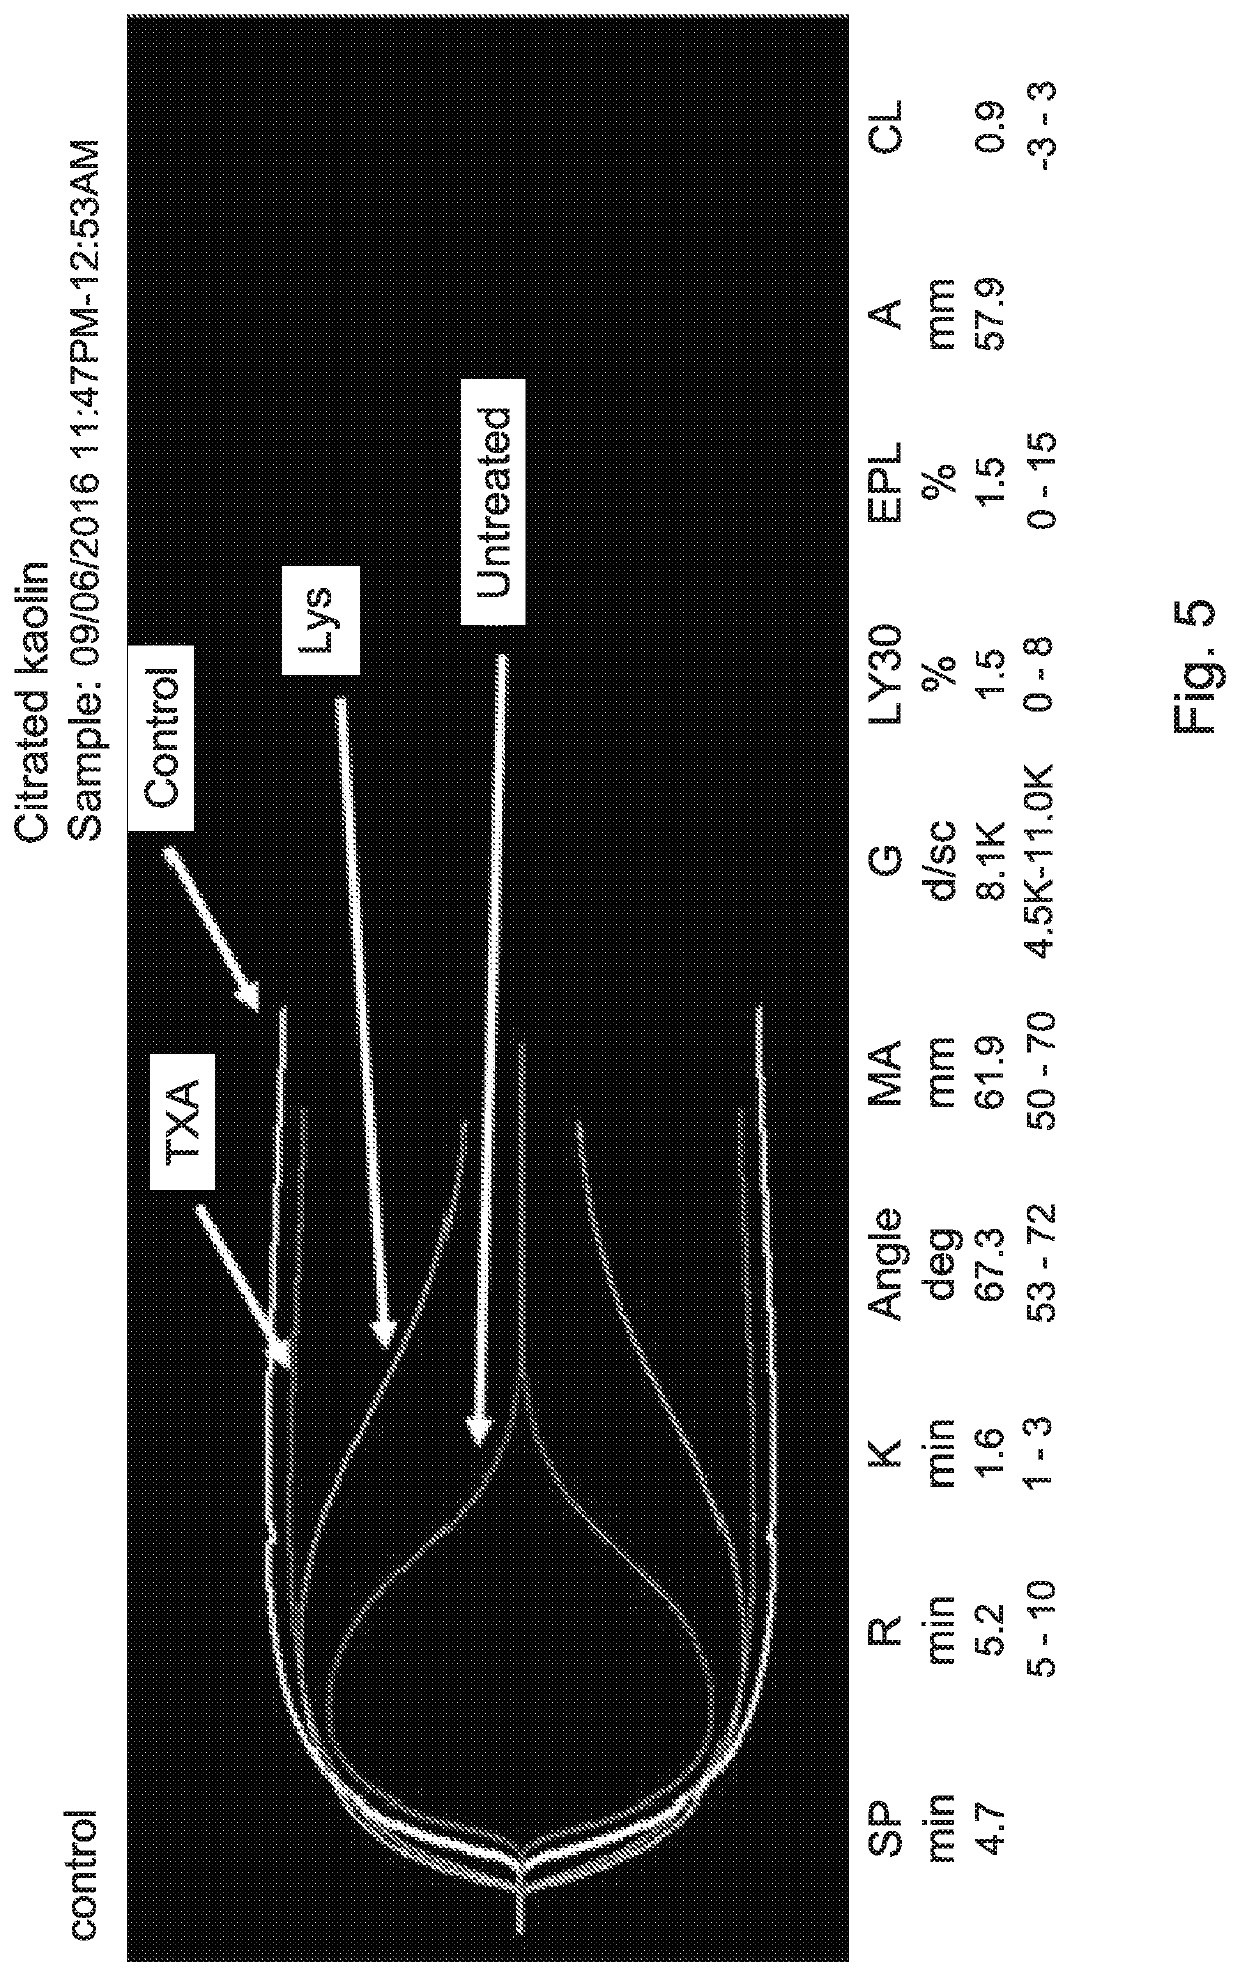 Human blood-derived products having decreased fibrinolytic activity and uses thereof in hemostatic disorders